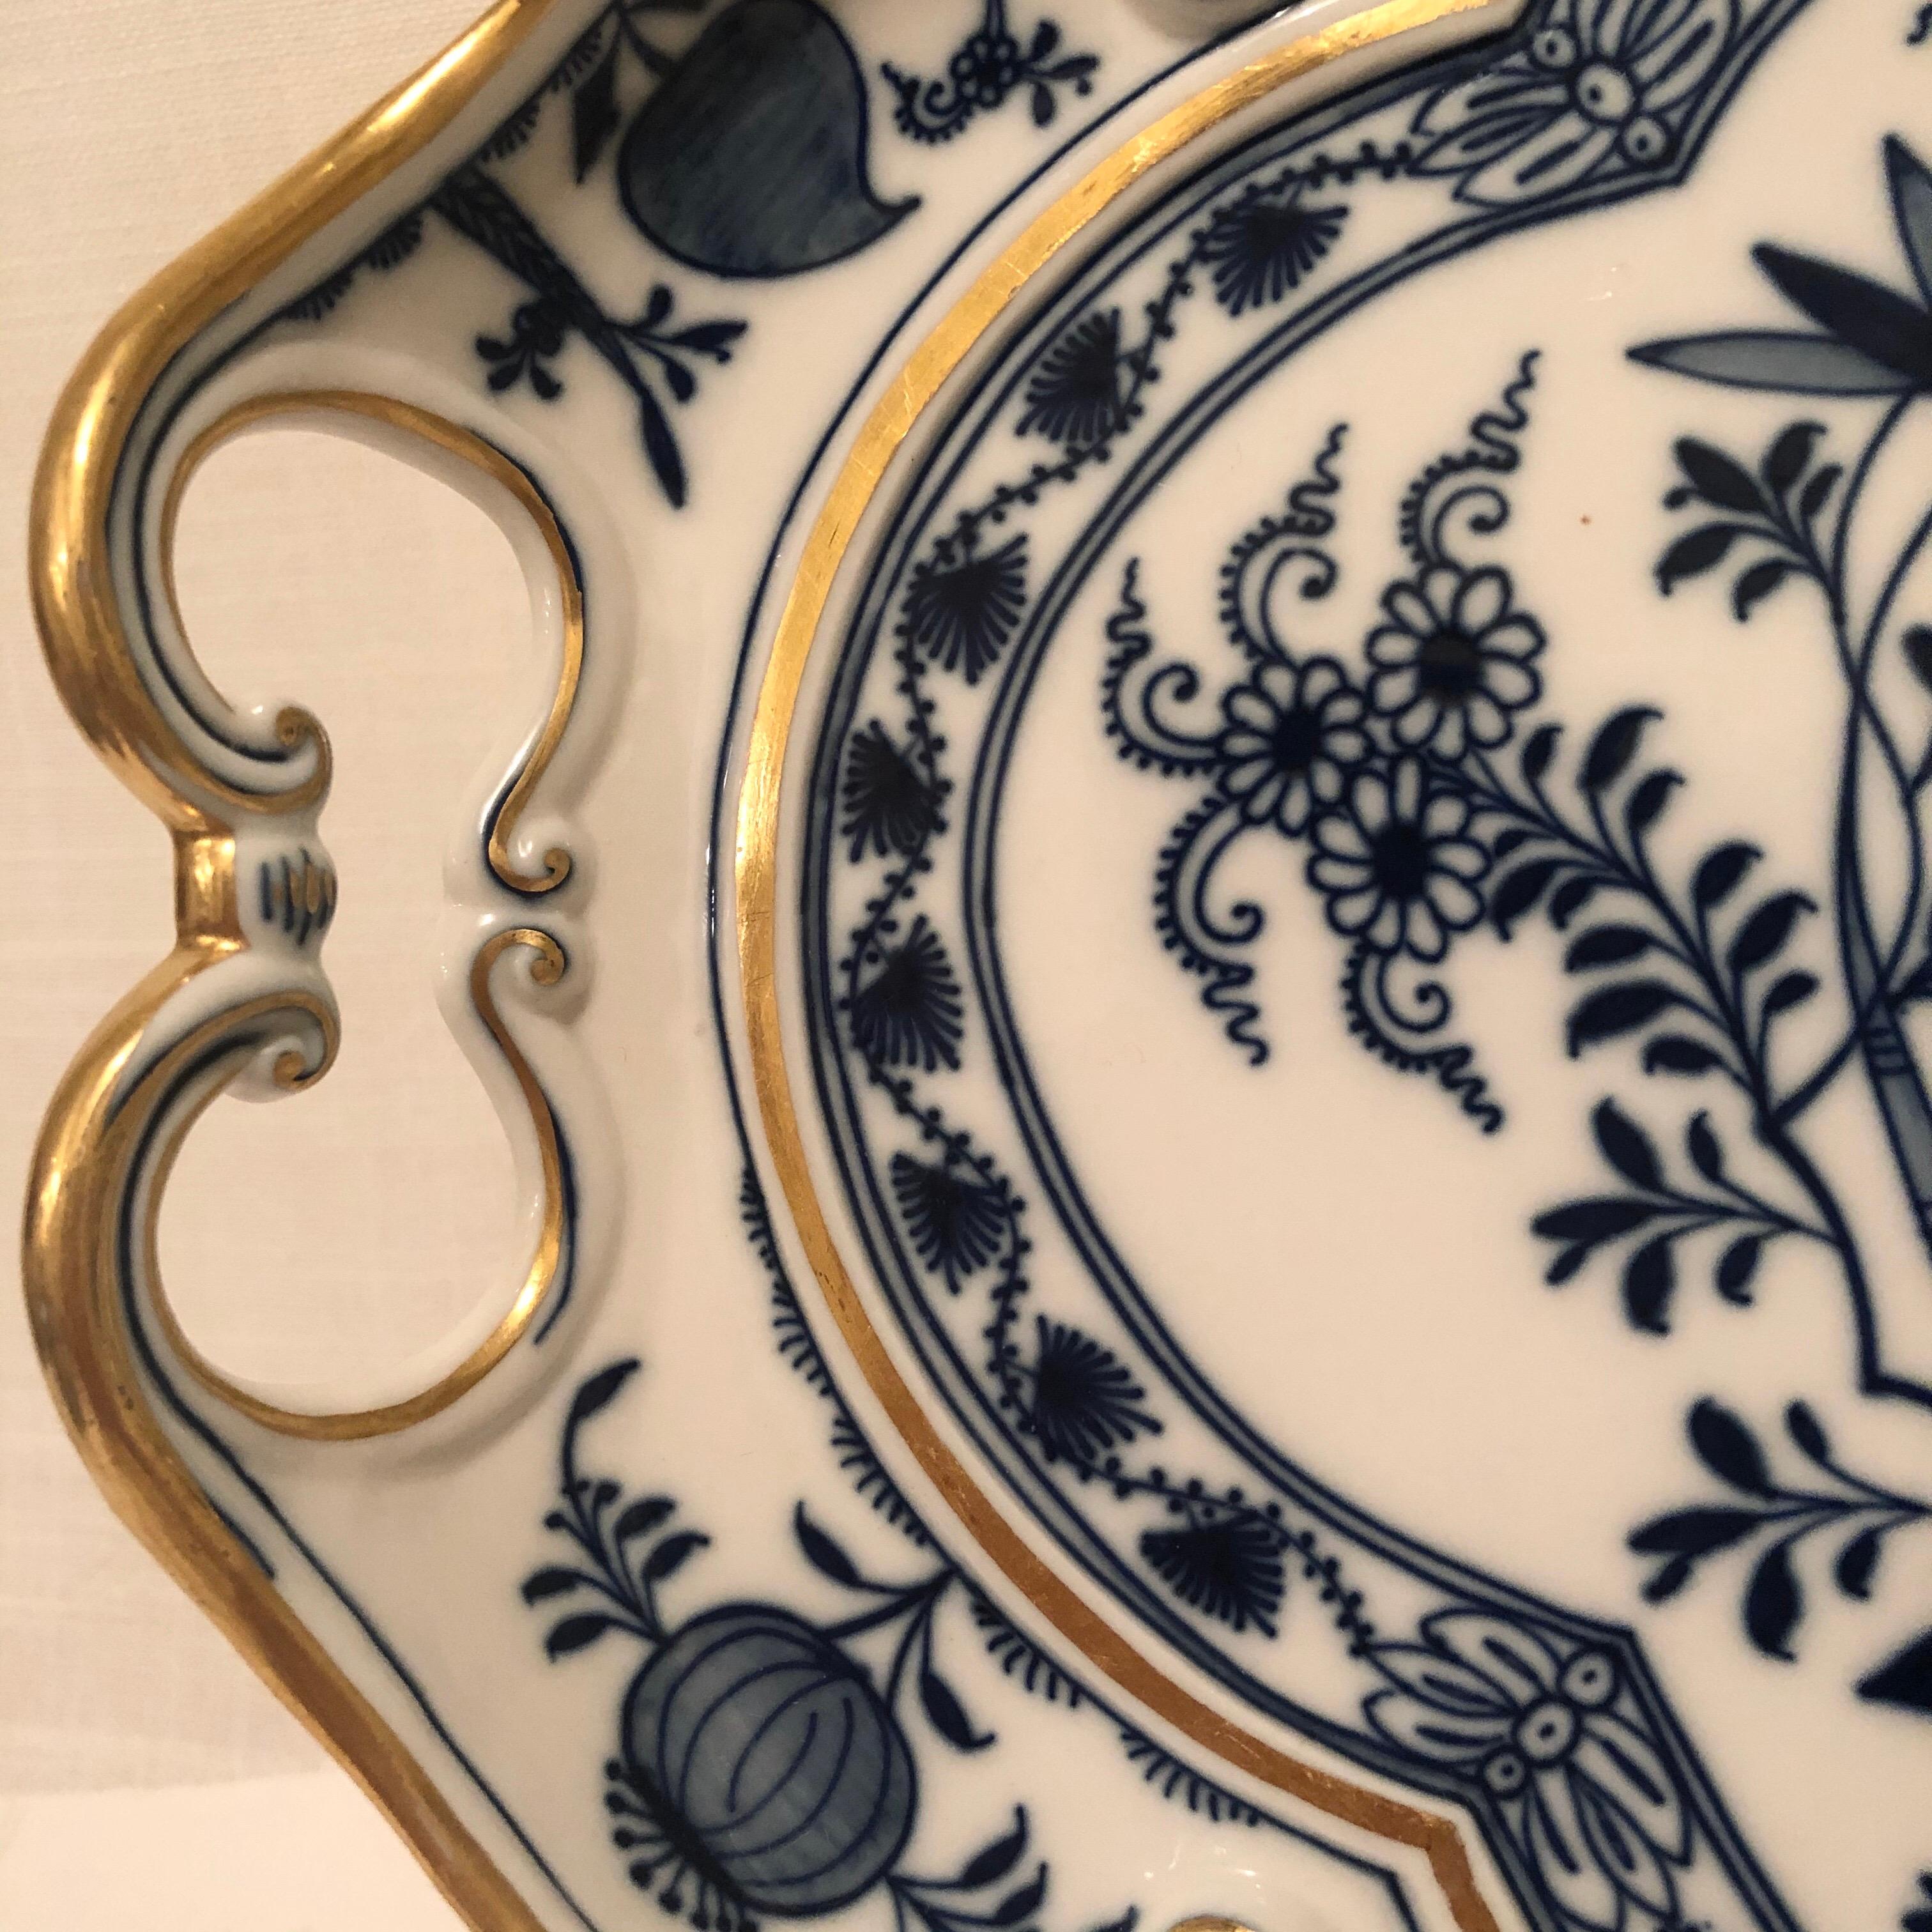 Rococo Meissen Blue Onion Fluted Serving Tray with Gold Border and Handles